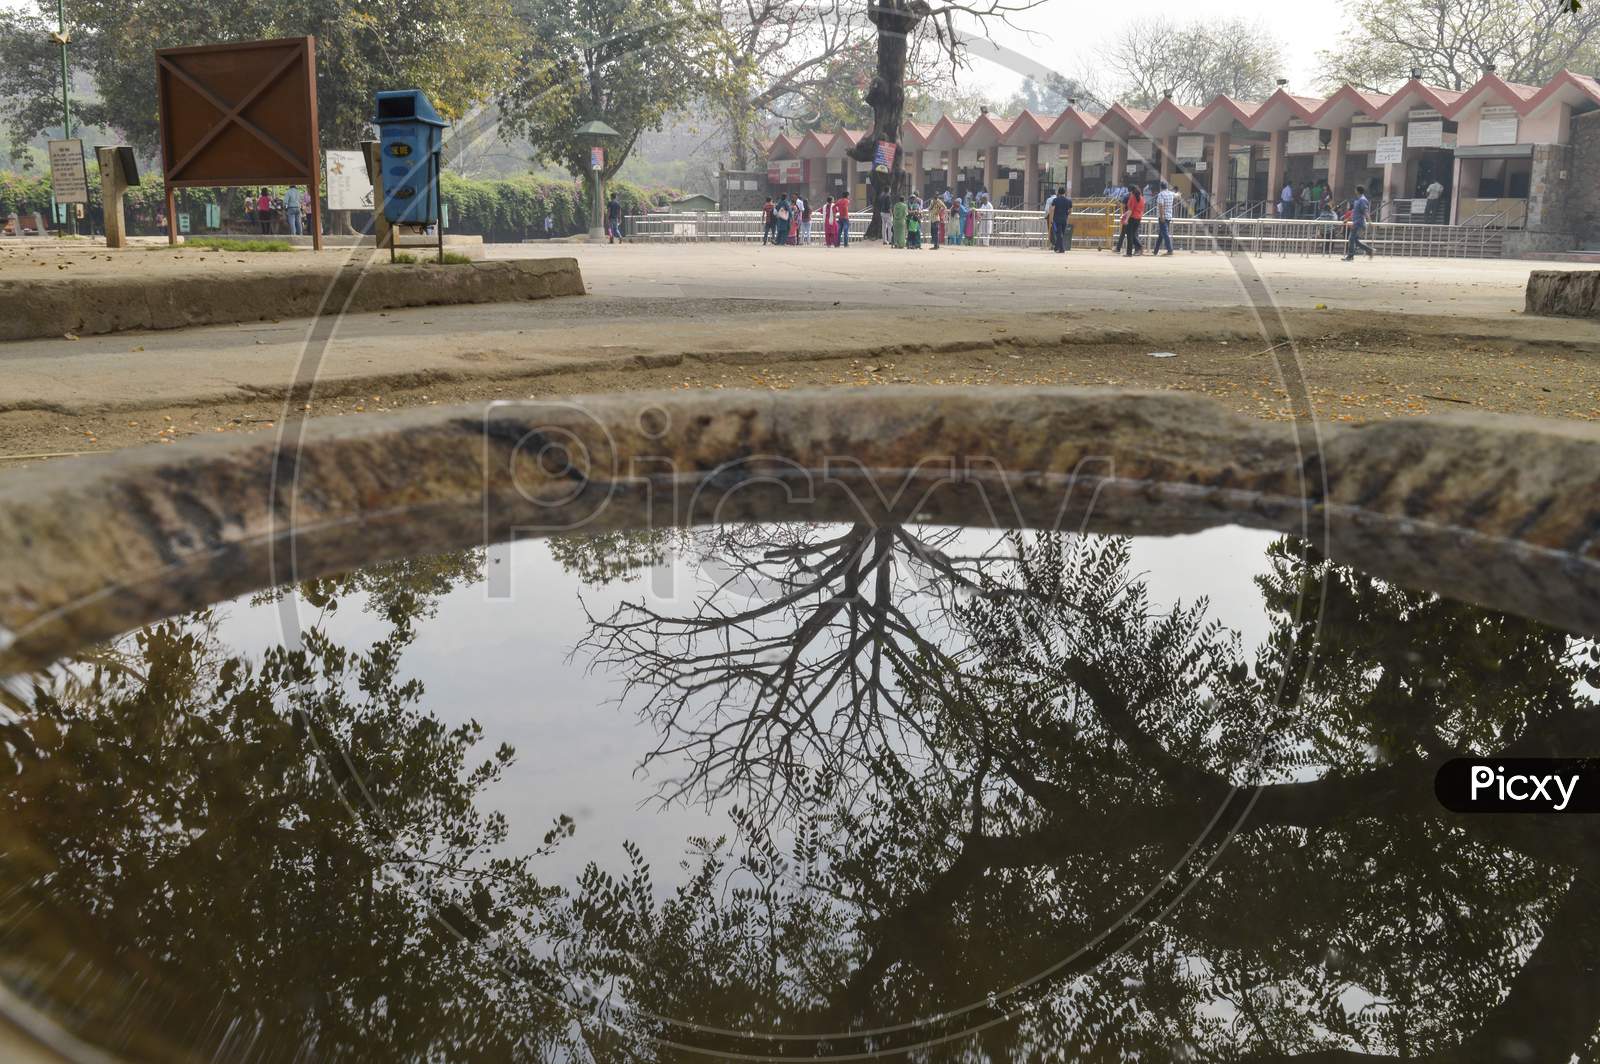 A Reflection Of Big Tree Which Is Located Outside Of Zoo And Old Fort With Sky.